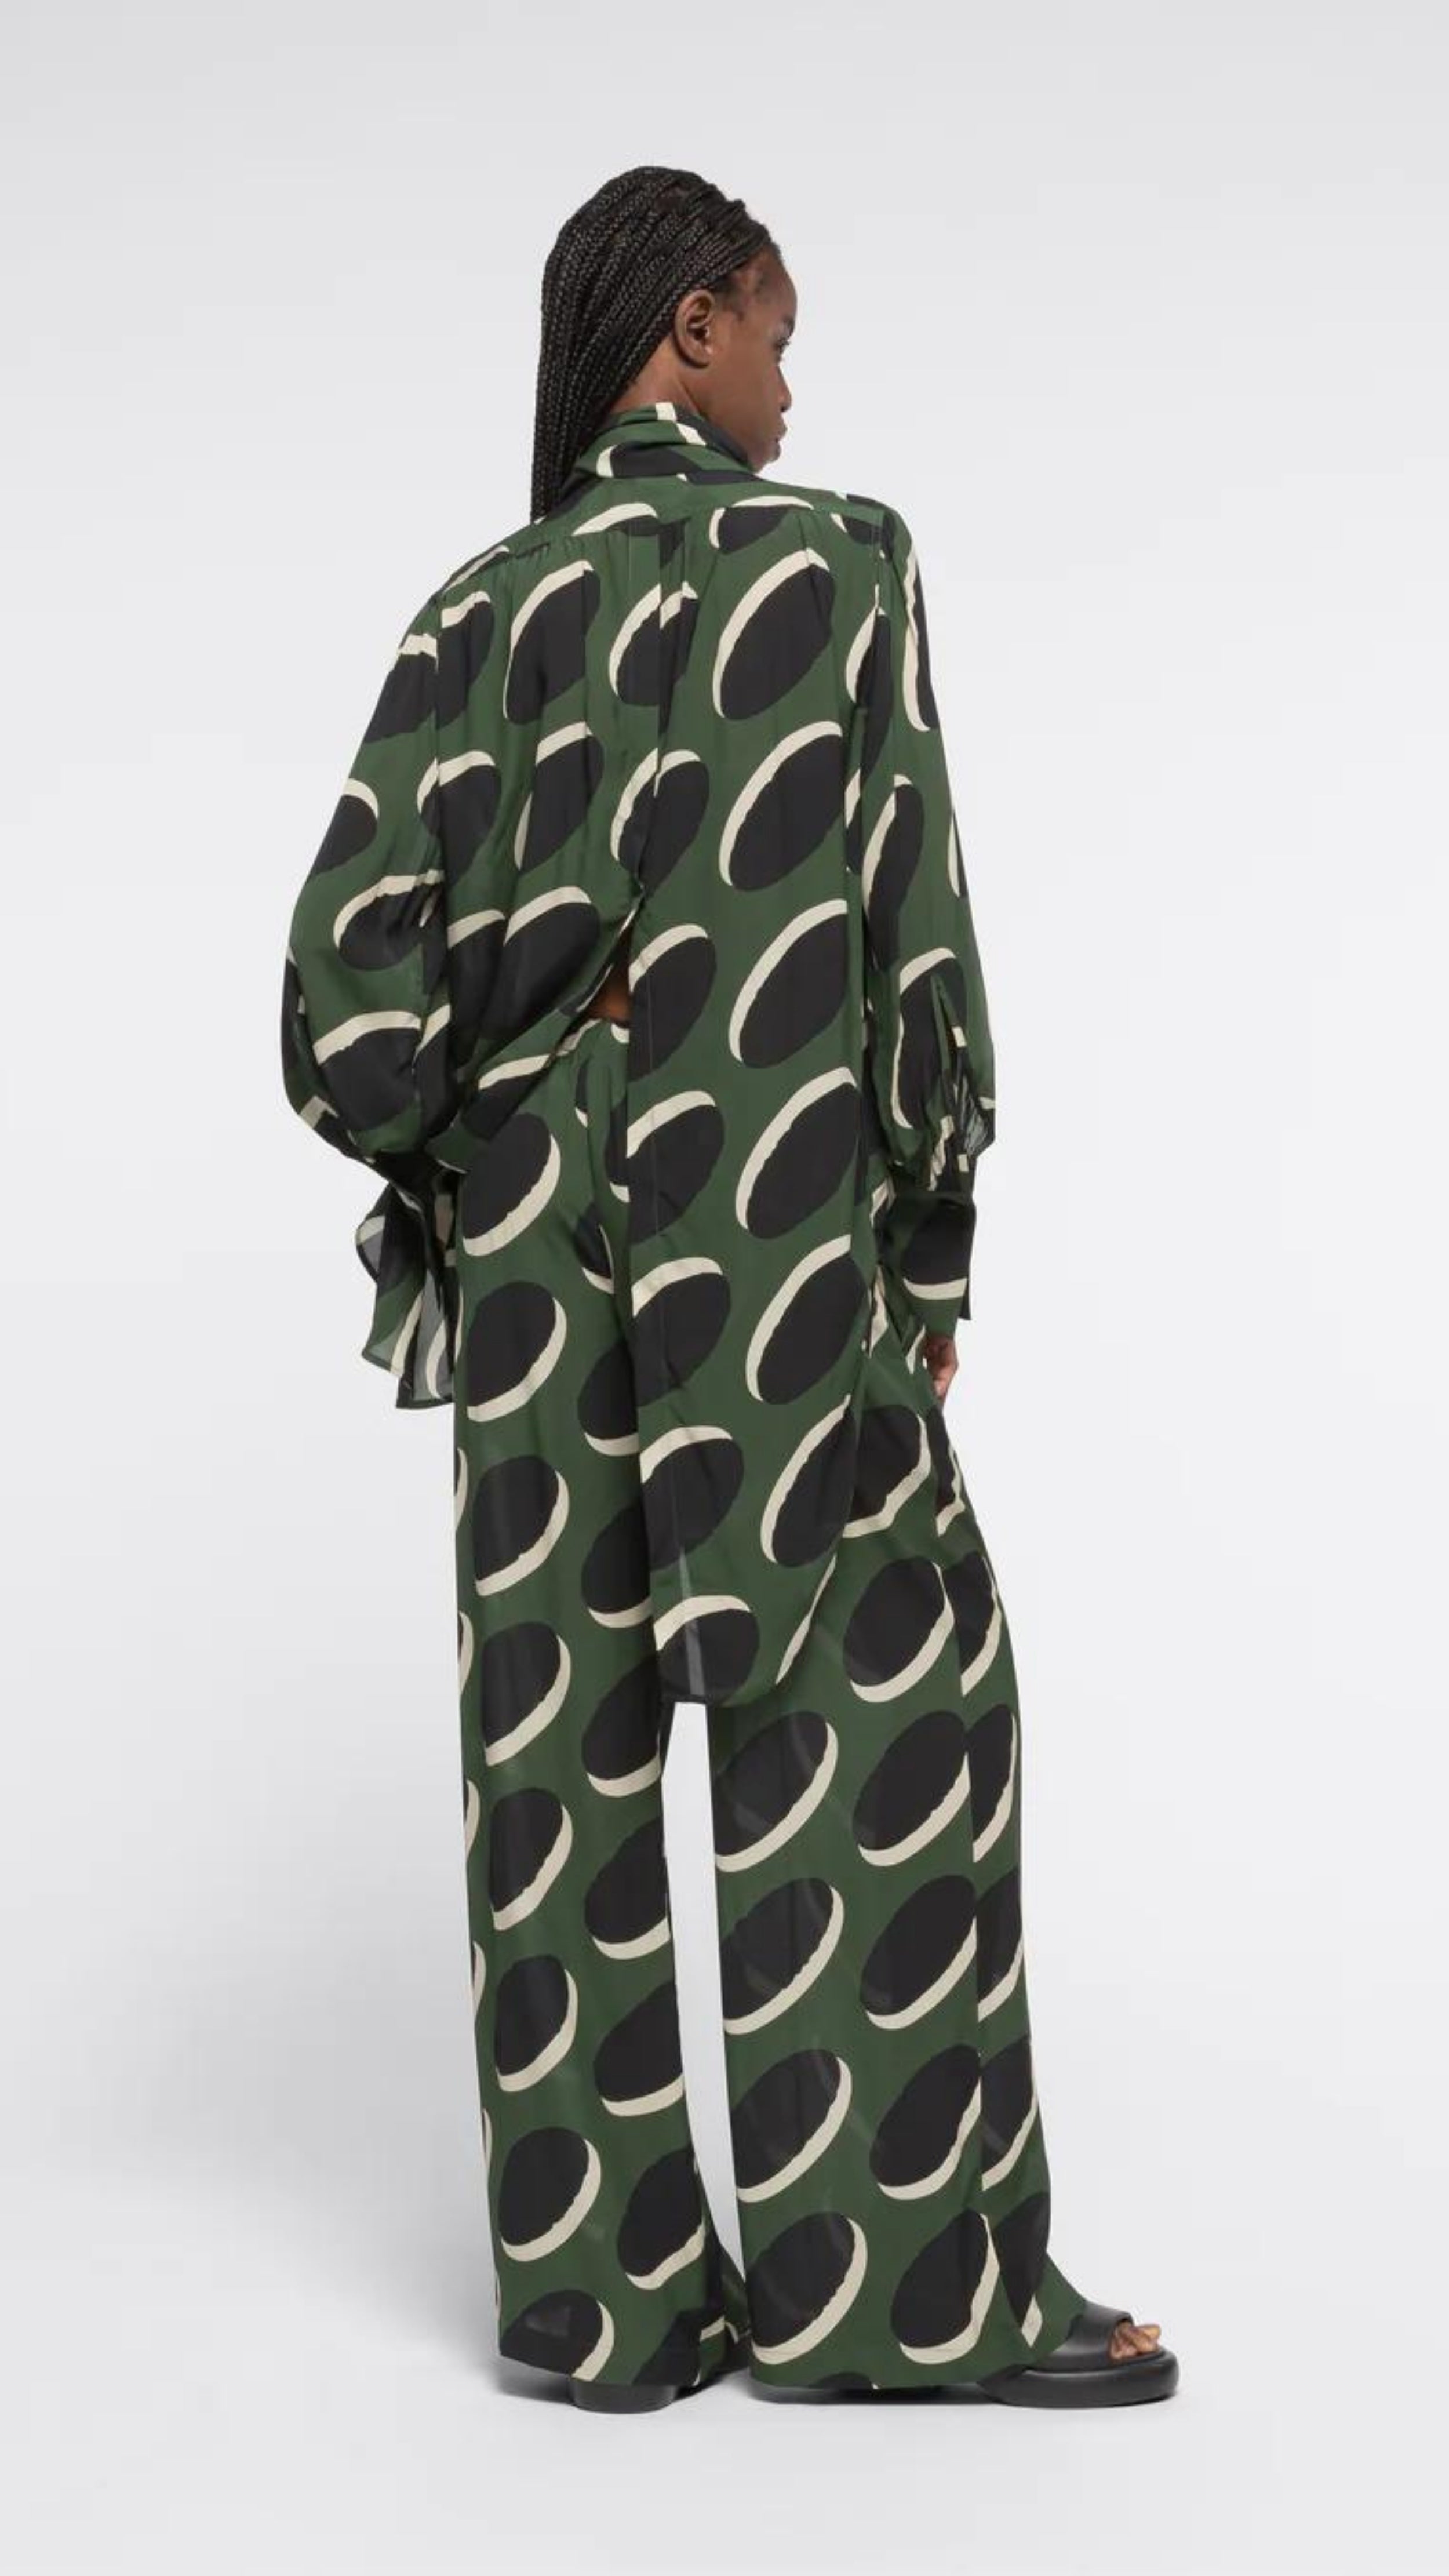 AZ Factory Colville Molly Molloy Lucinda Chambers, Pajama Pants in Khaki Macaroon Pajama loose style silky pants with elastic and drawstring waist band. Crafted in olive green with black and ecru oval pattern. Shown on model facing back.